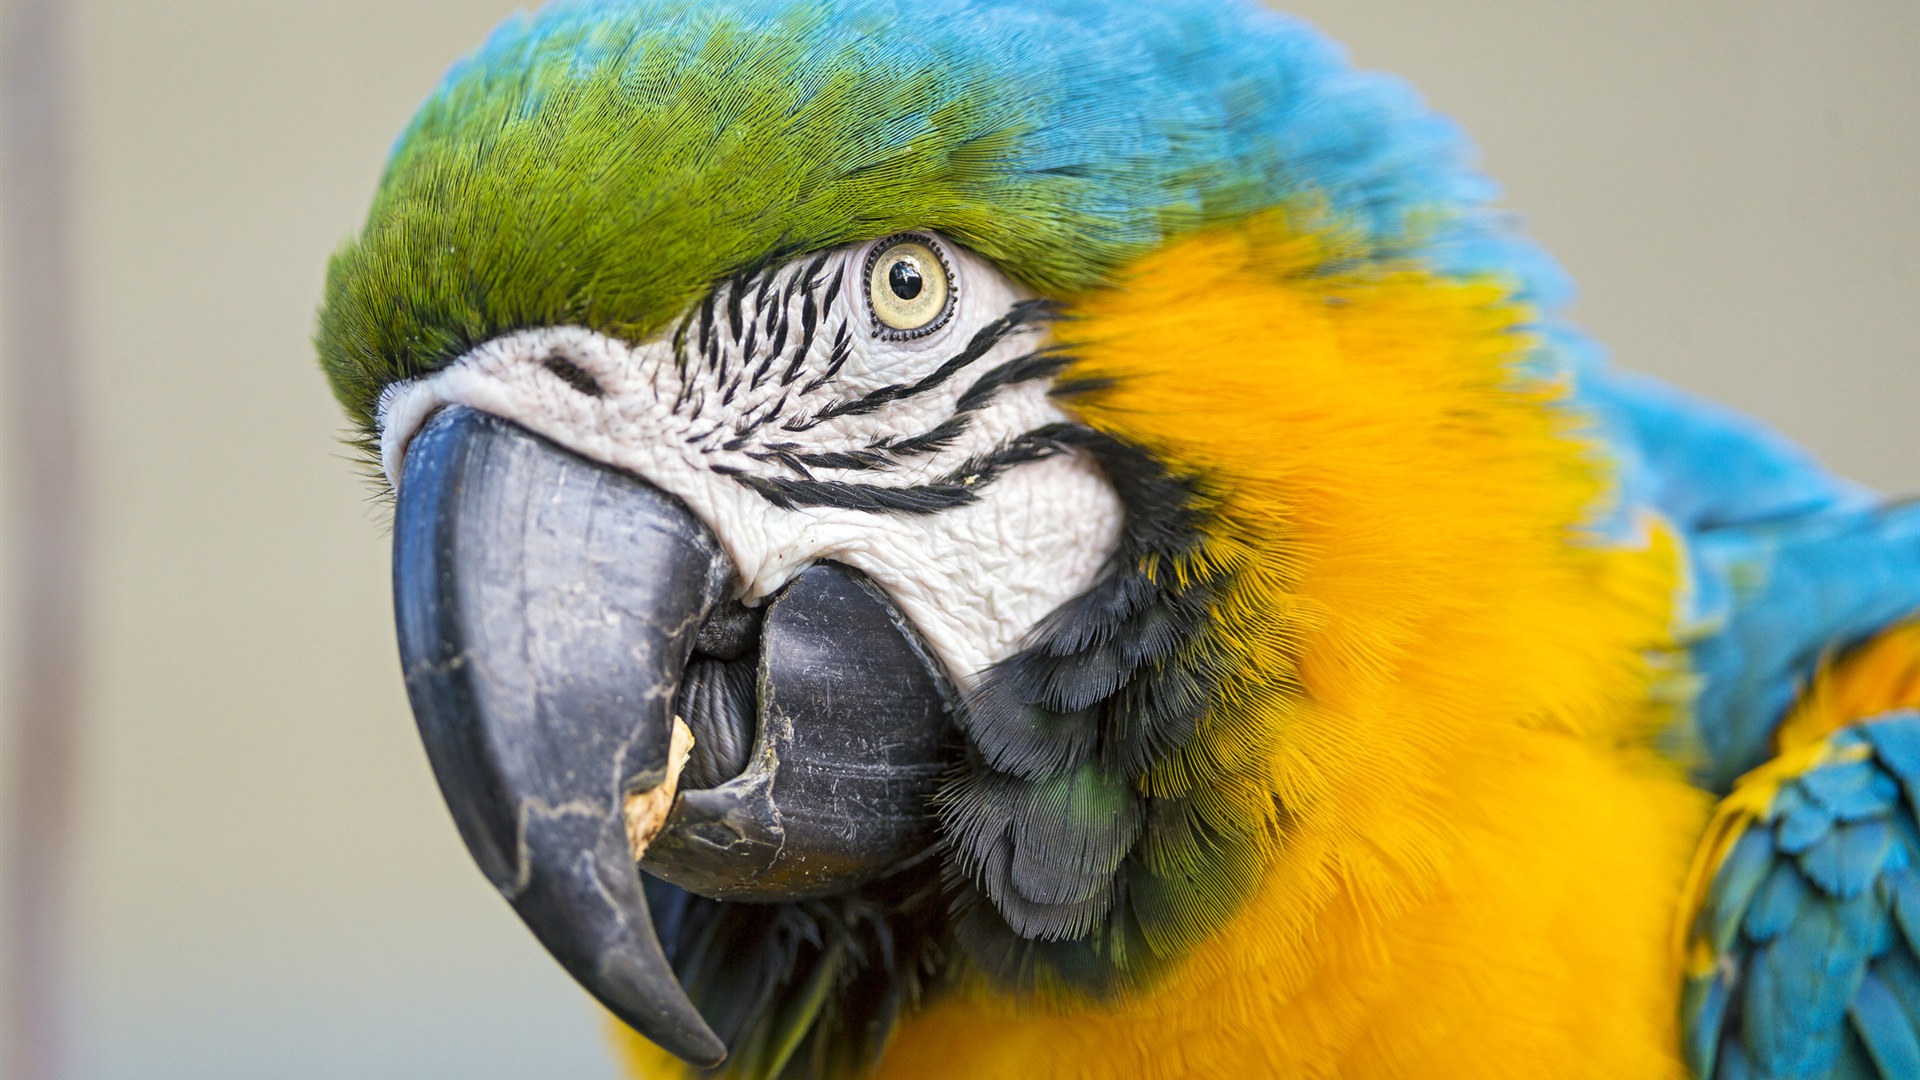 Macaw close-up HD wallpapers #15 - 1920x1080